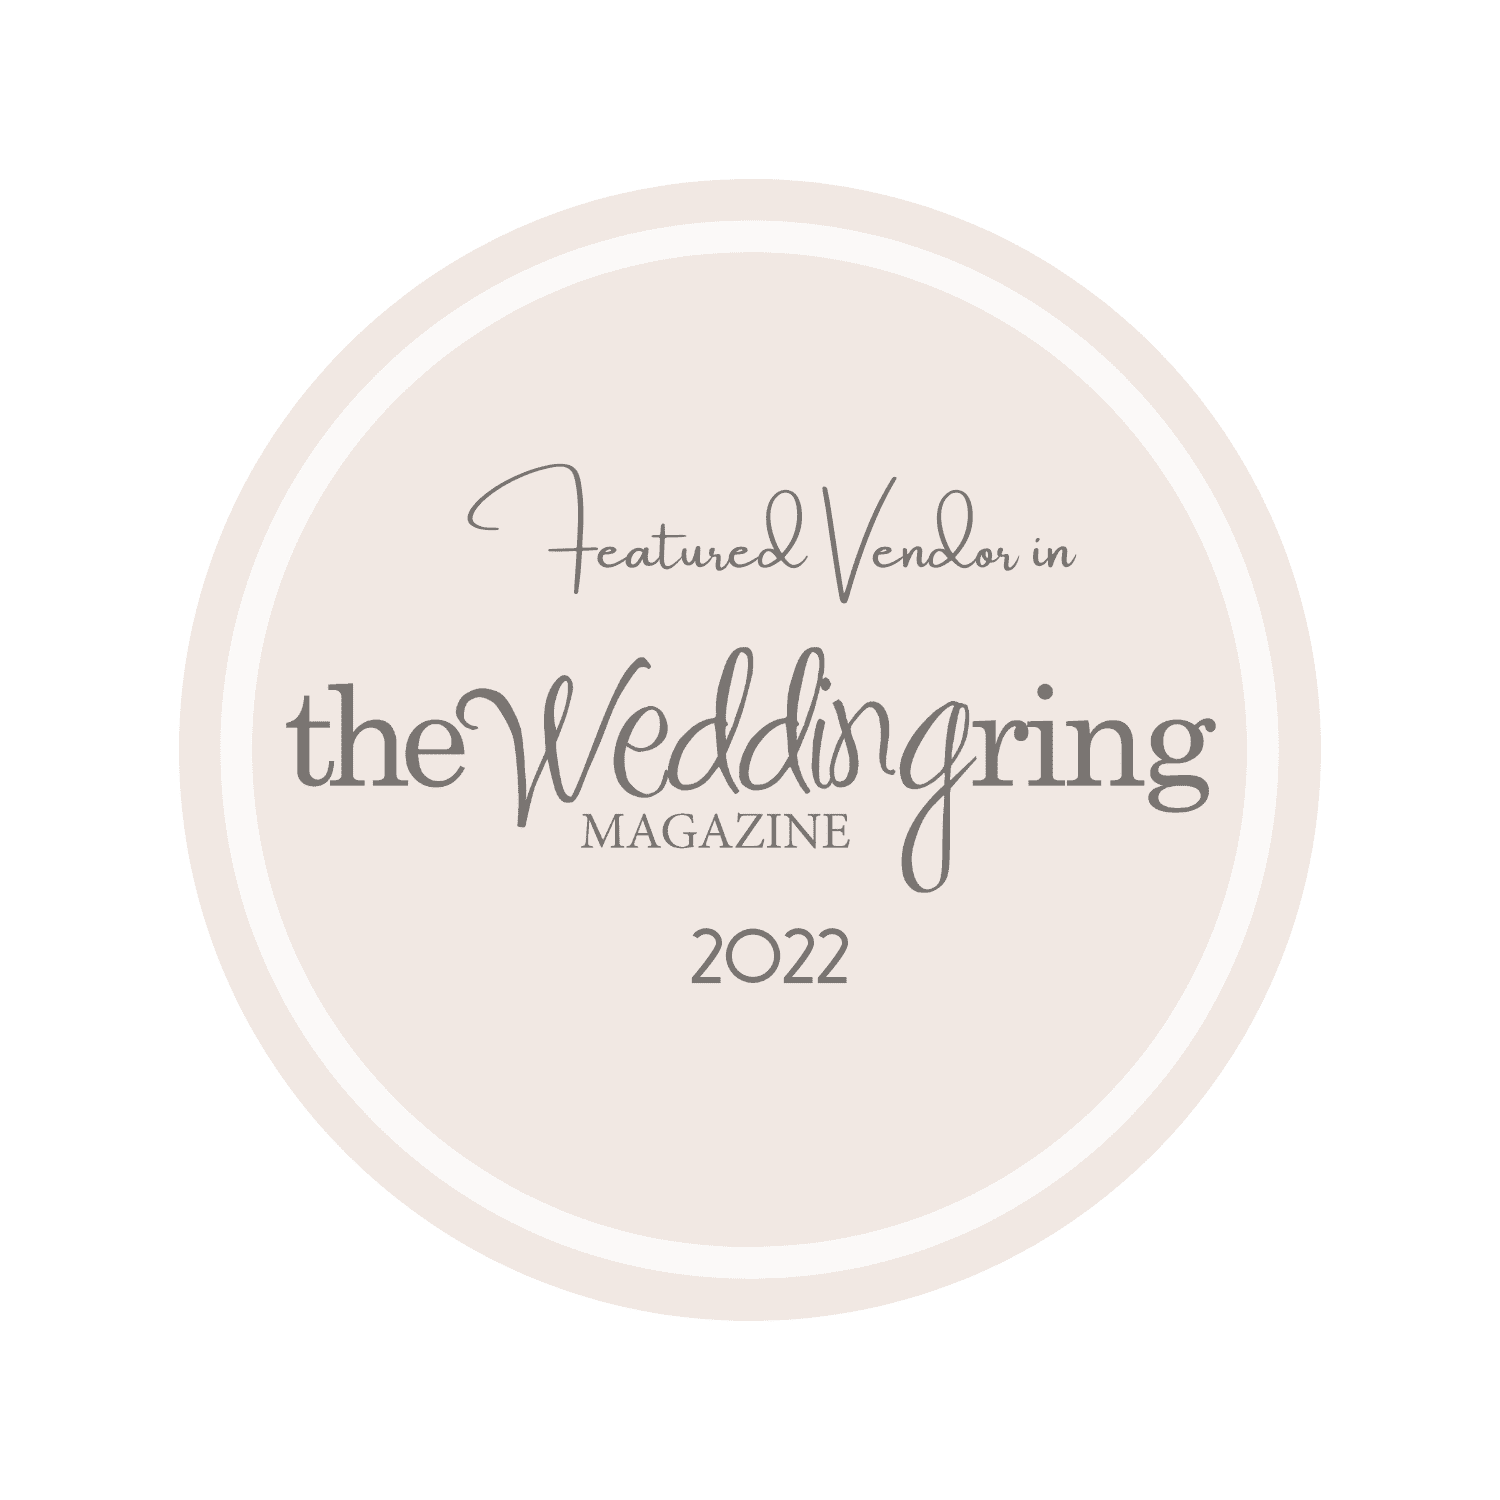 The Wedding Ring Featured Icon.